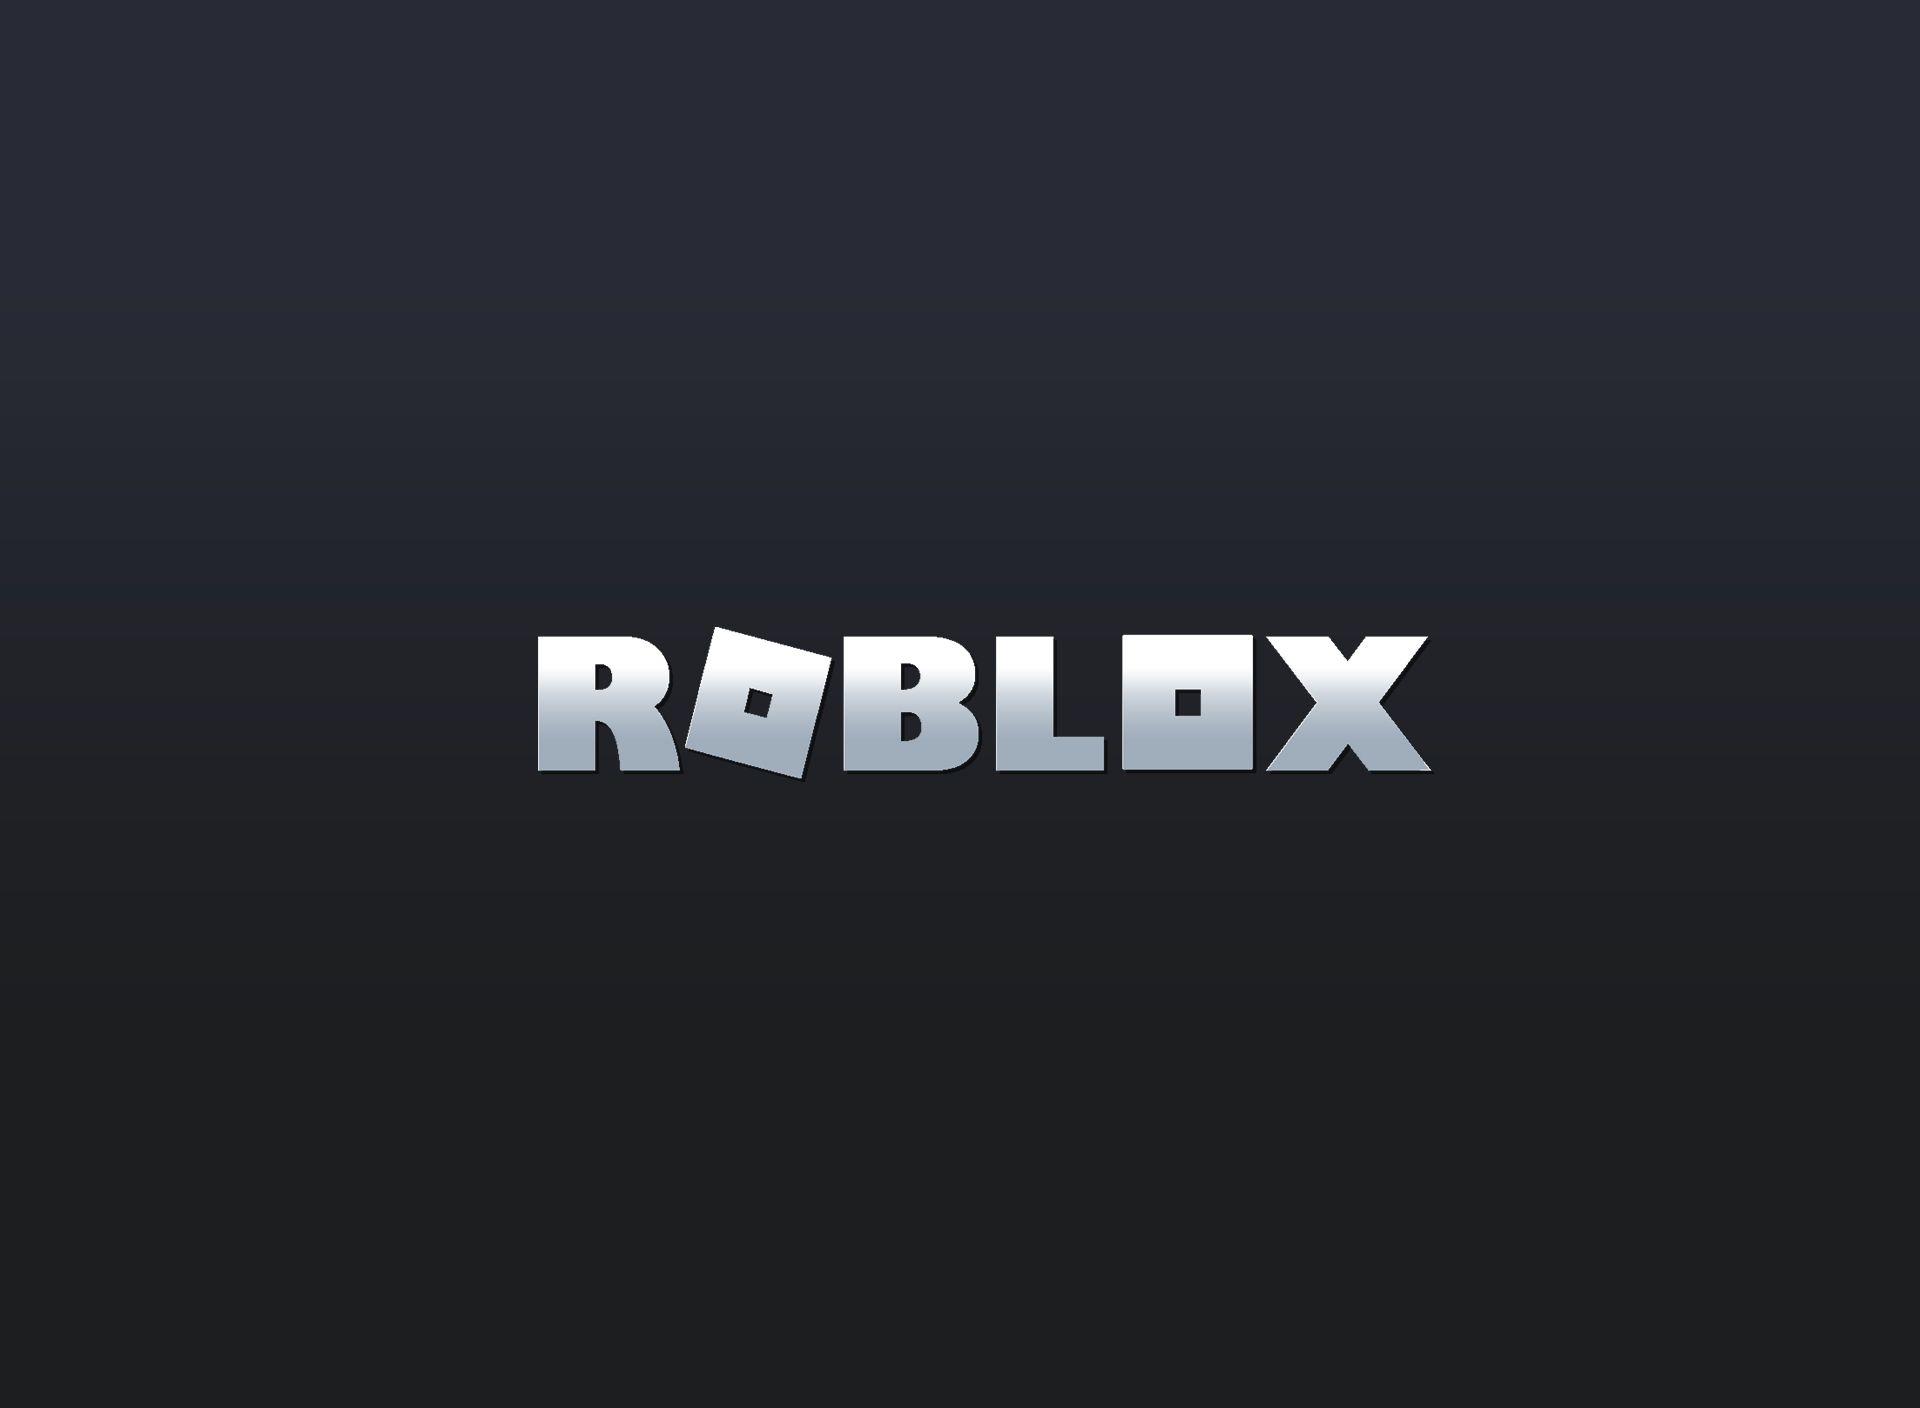 Roblox Youtube Wallpapers Top Free Roblox Youtube Backgrounds Wallpaperaccess - how to make roblox background black